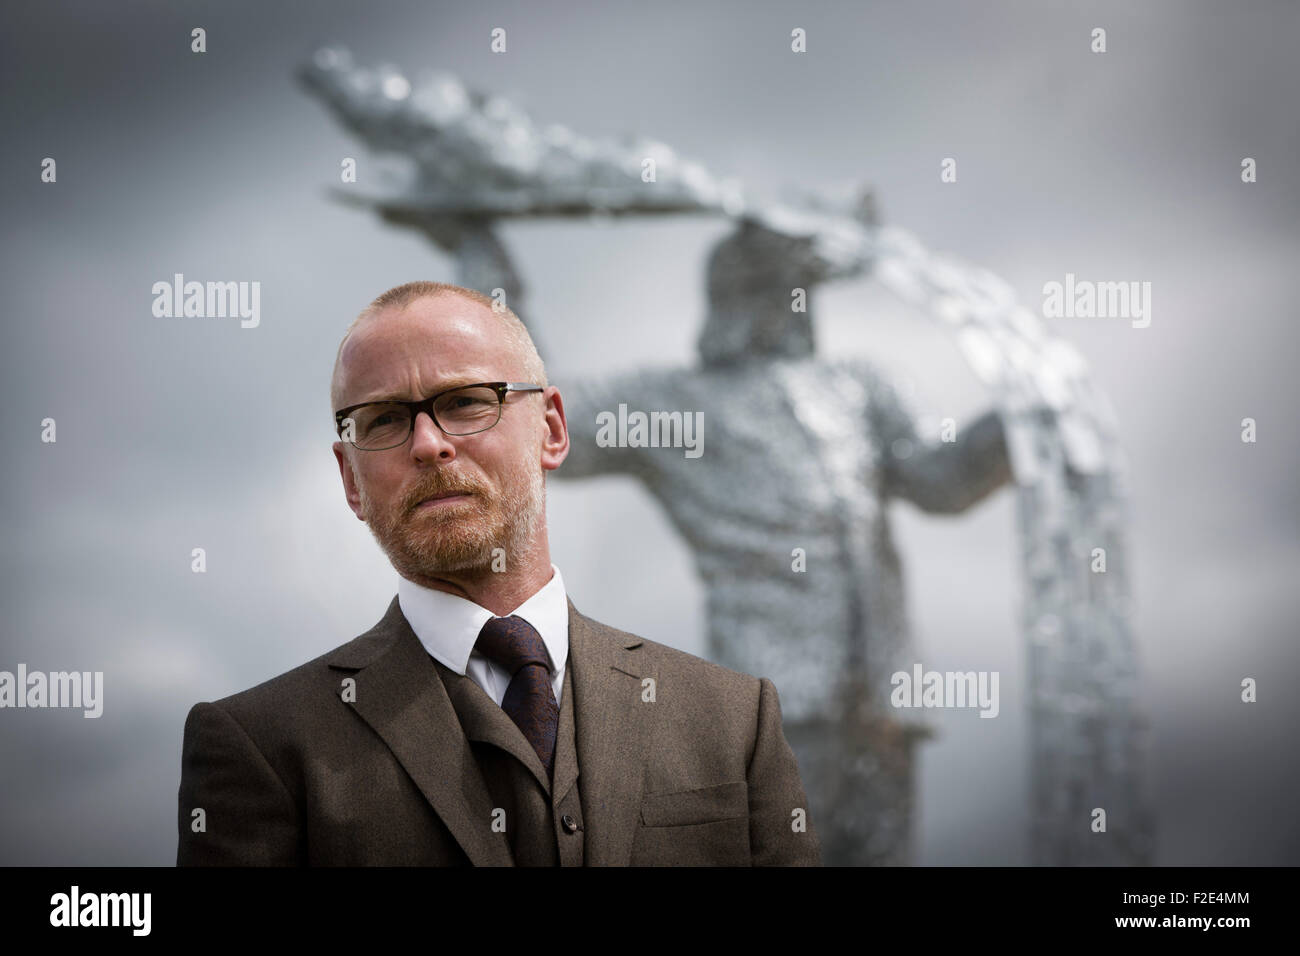 Andy Scott pictured at the official unveiling of Steel Man, his new sculpture made to commemorate those who lost their lives in the iron and steel industry in Scotland. The memorial was sited at Ravenscraig in Lanarkshire, on the site of Europe's largest former hot strip mill, which closed in 1992. The site was cleared in 1996 and now houses a sports centre, college and housing. Stock Photo